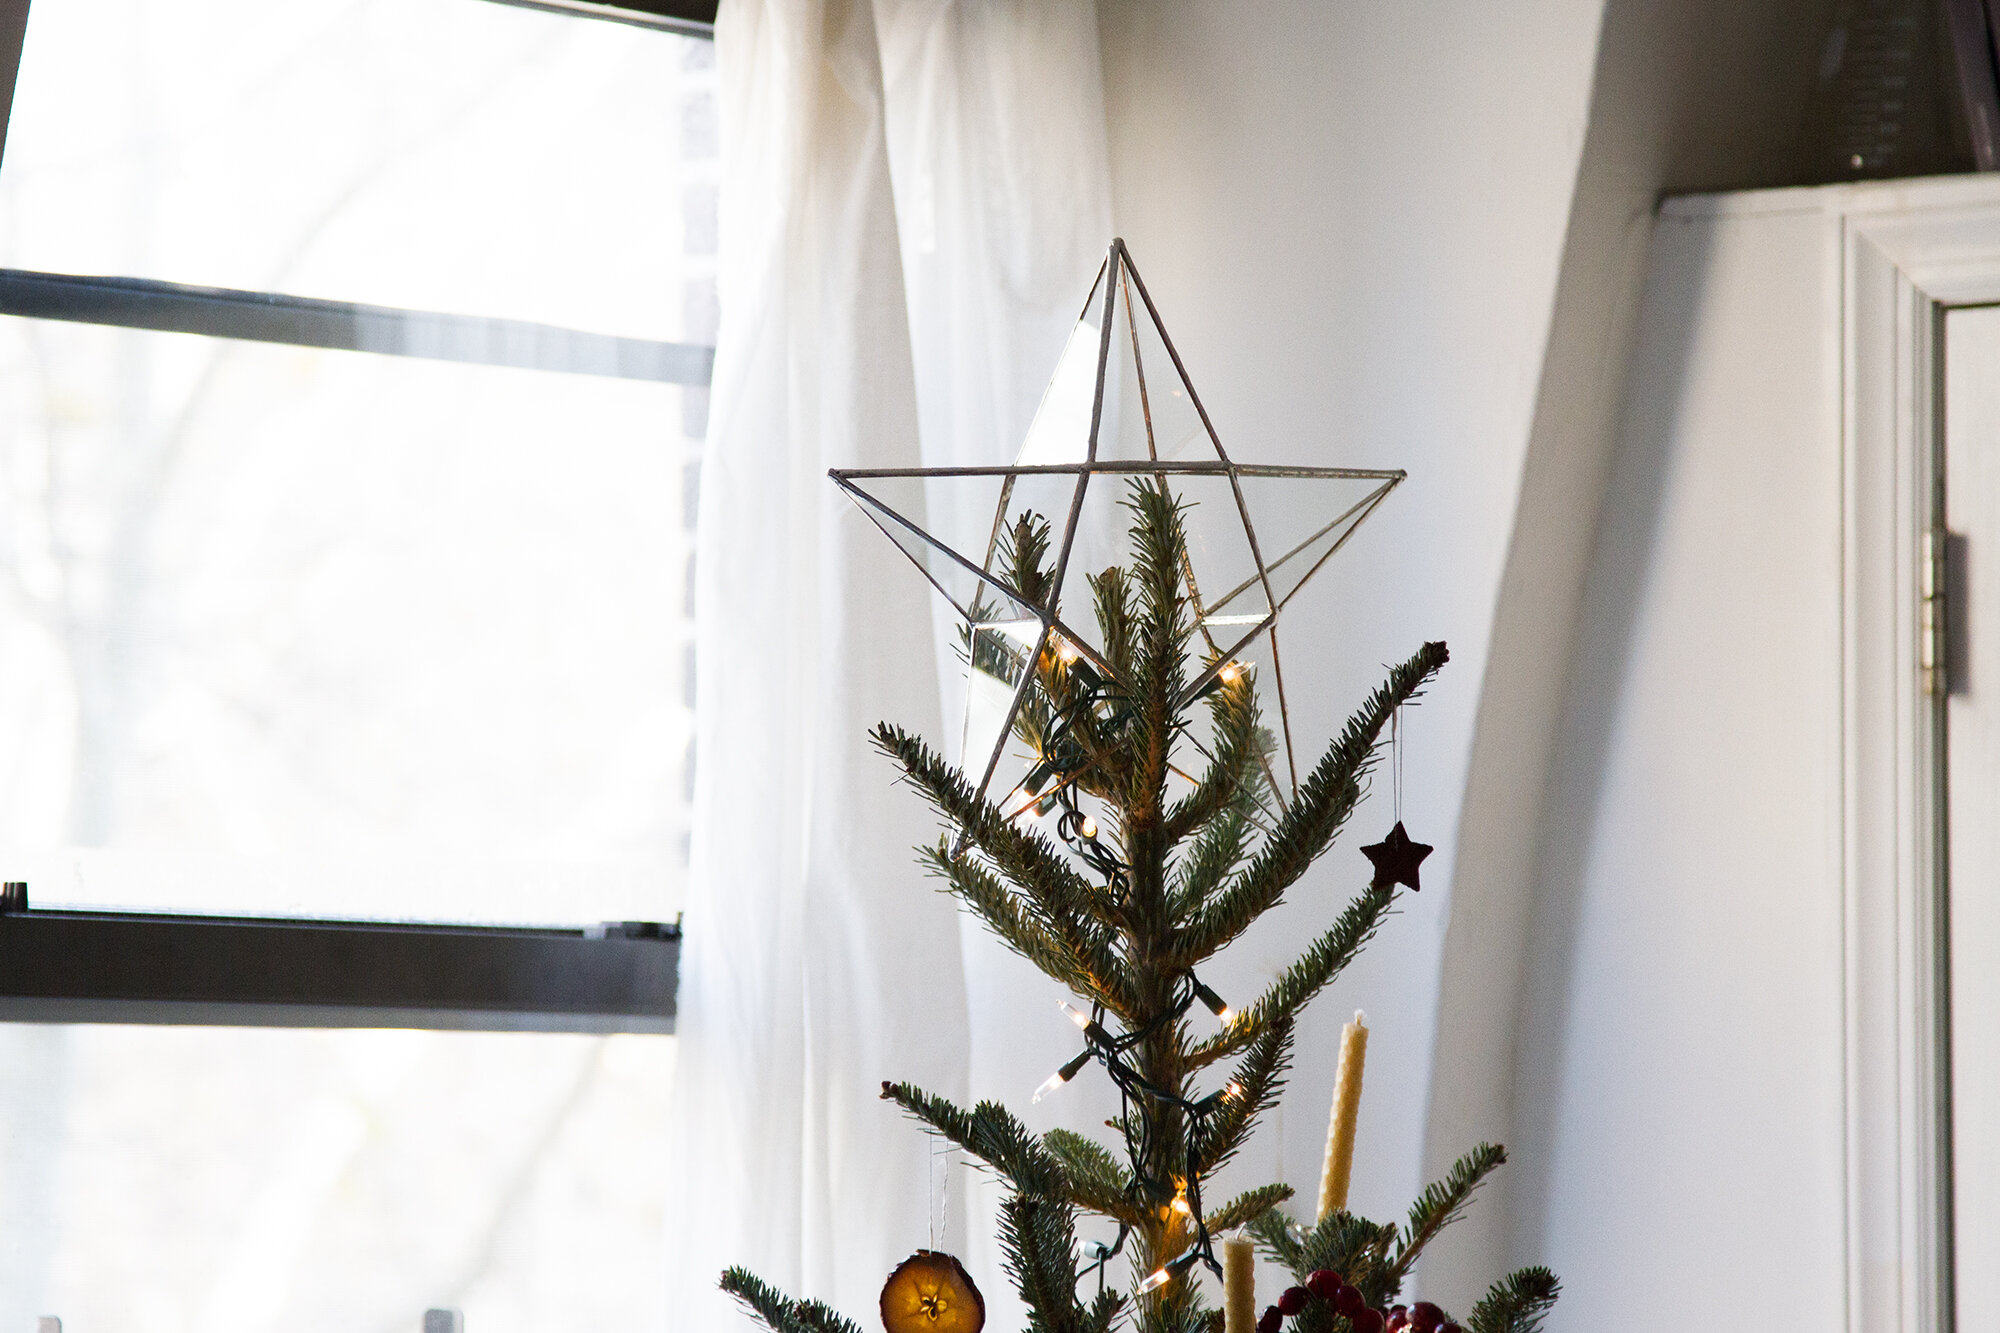 clutter free holiday decorations | reading my tea leaves